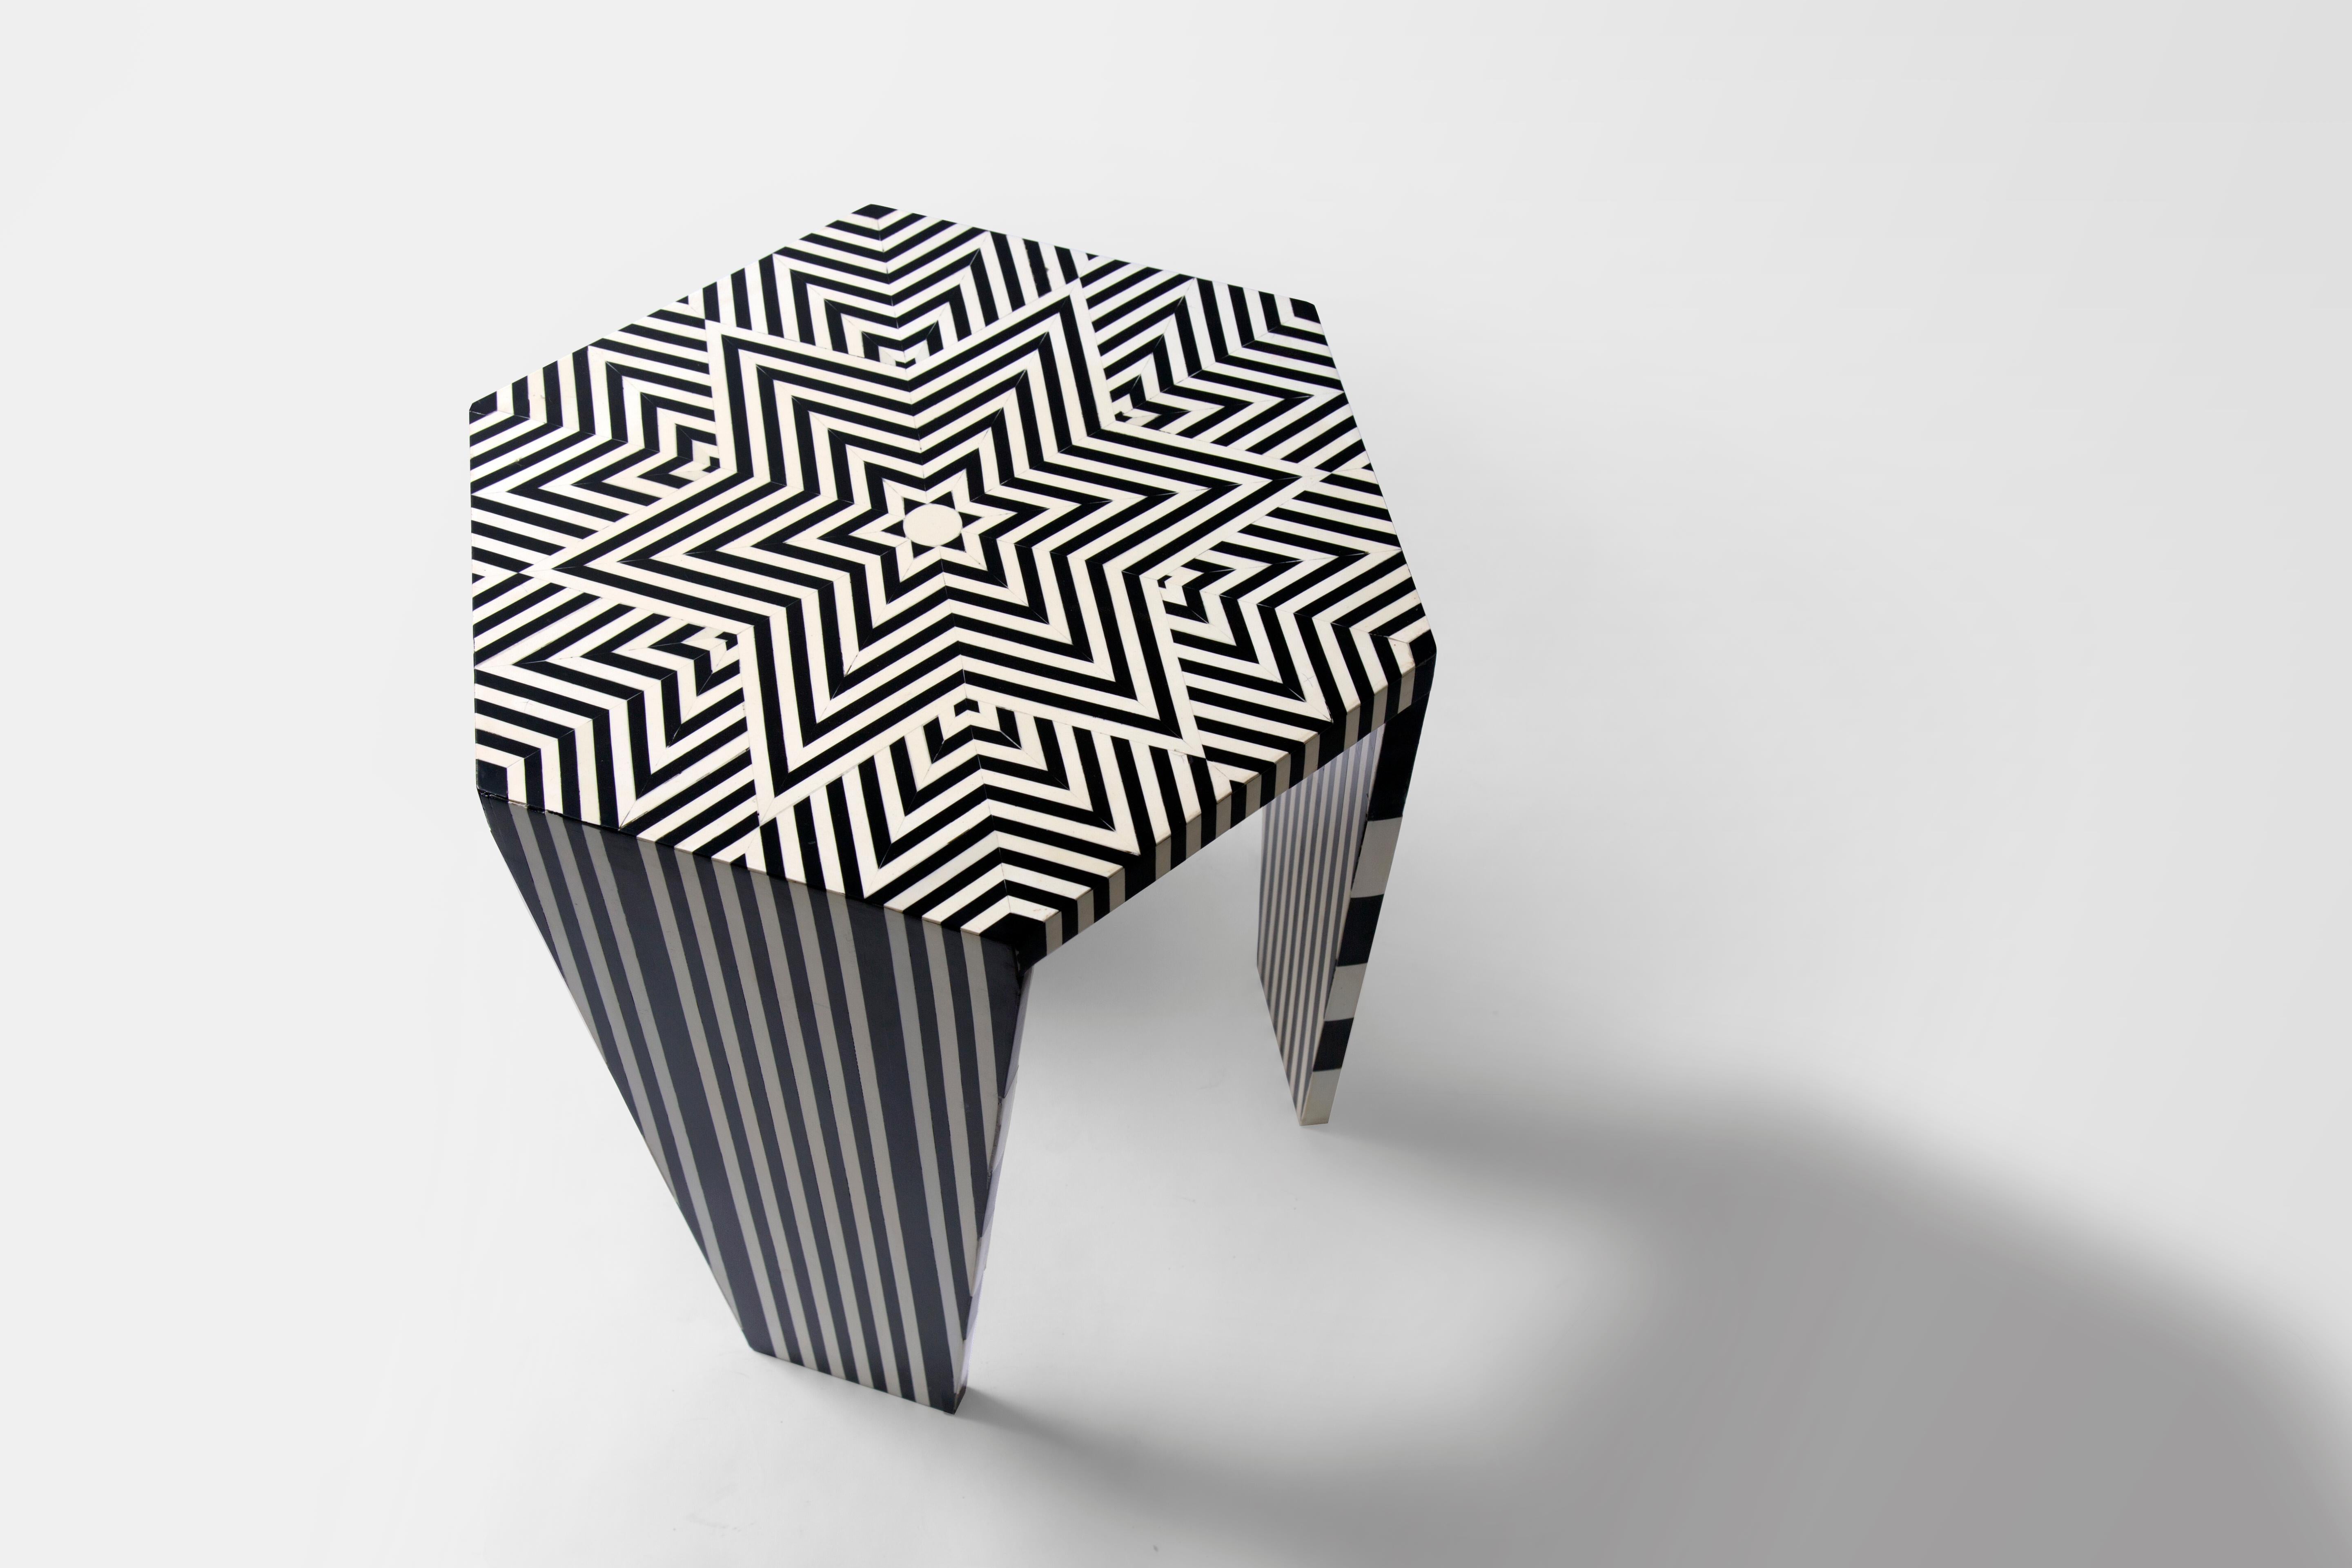 Hand-Crafted Side Table with Black & White Star Pattern Made of Acrylic.
Our bestselling Adom side table is so versatile that it could be nestled anywhere you want! It is made of hand-crafted black and white acrylic strips intricately placed like a